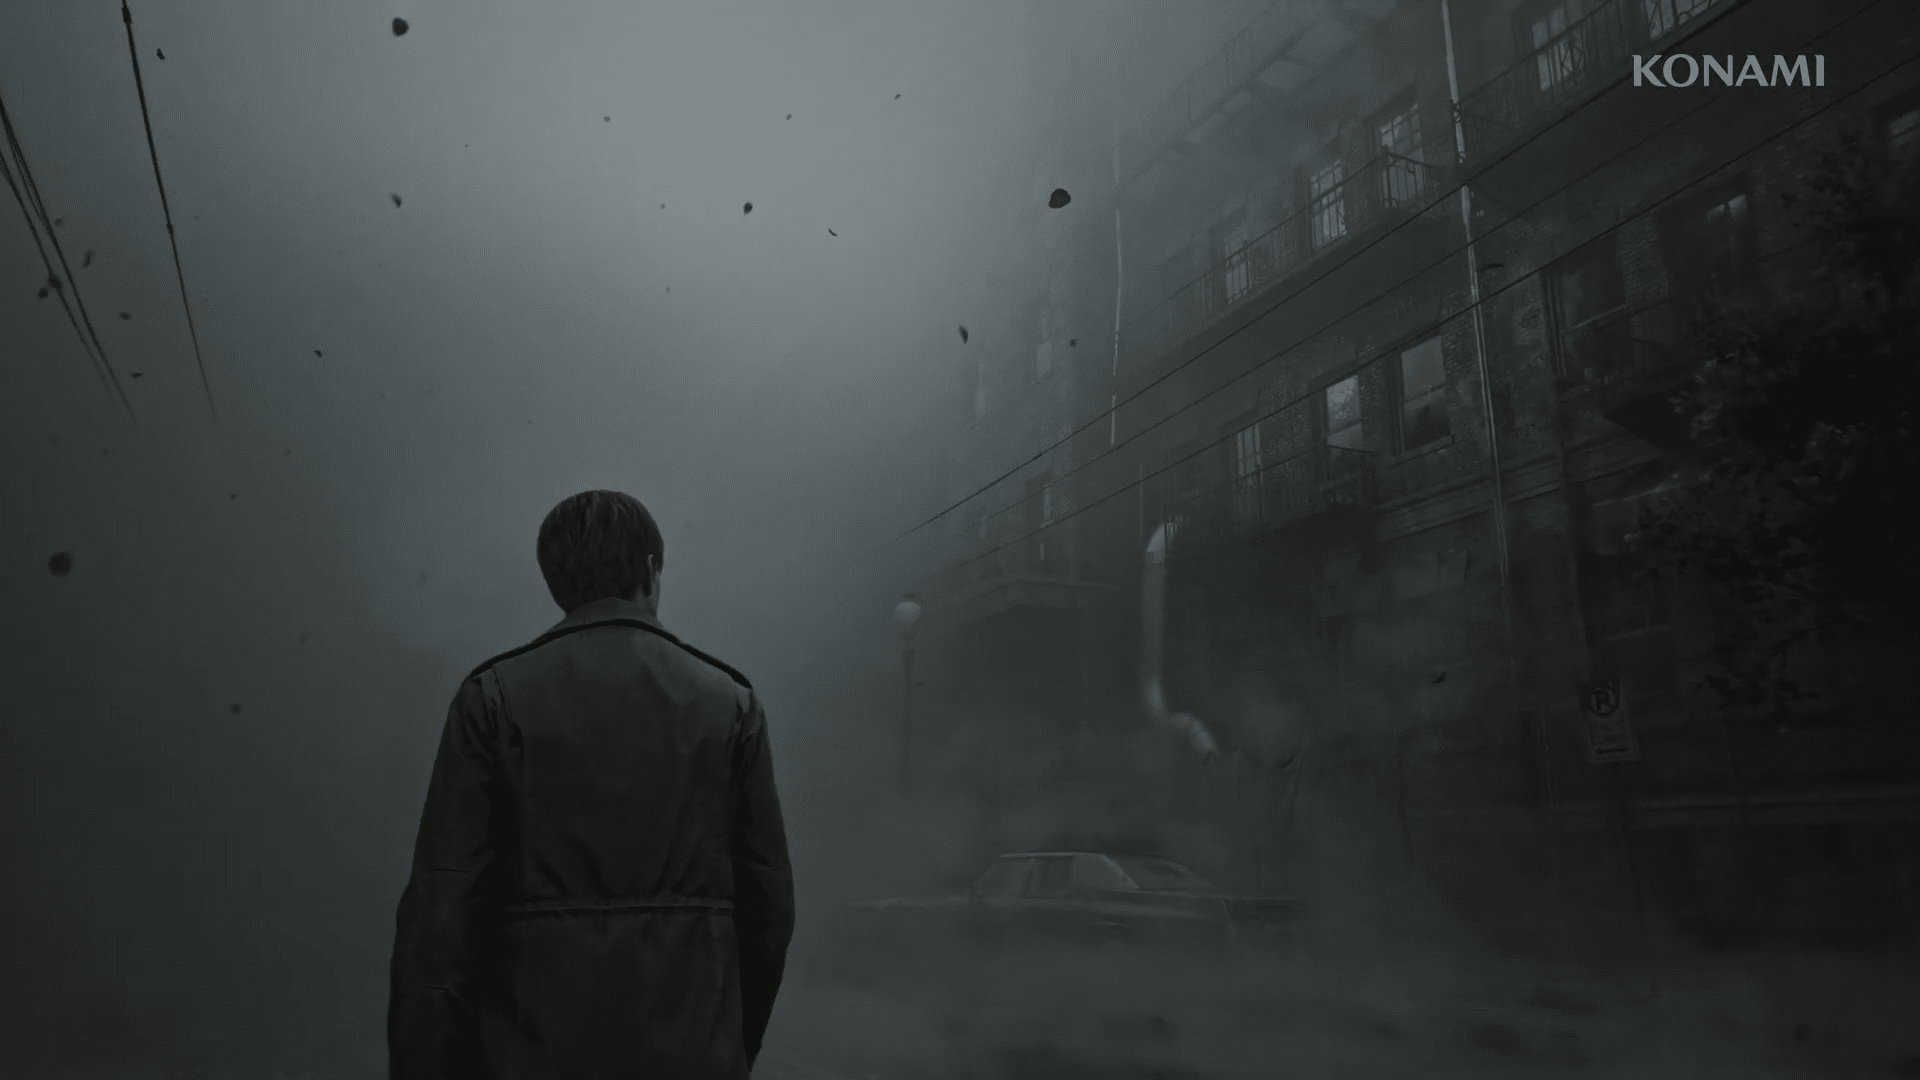 Silent Hill 2 Remake May Upset People, Claims Former Series Writer - MP1st